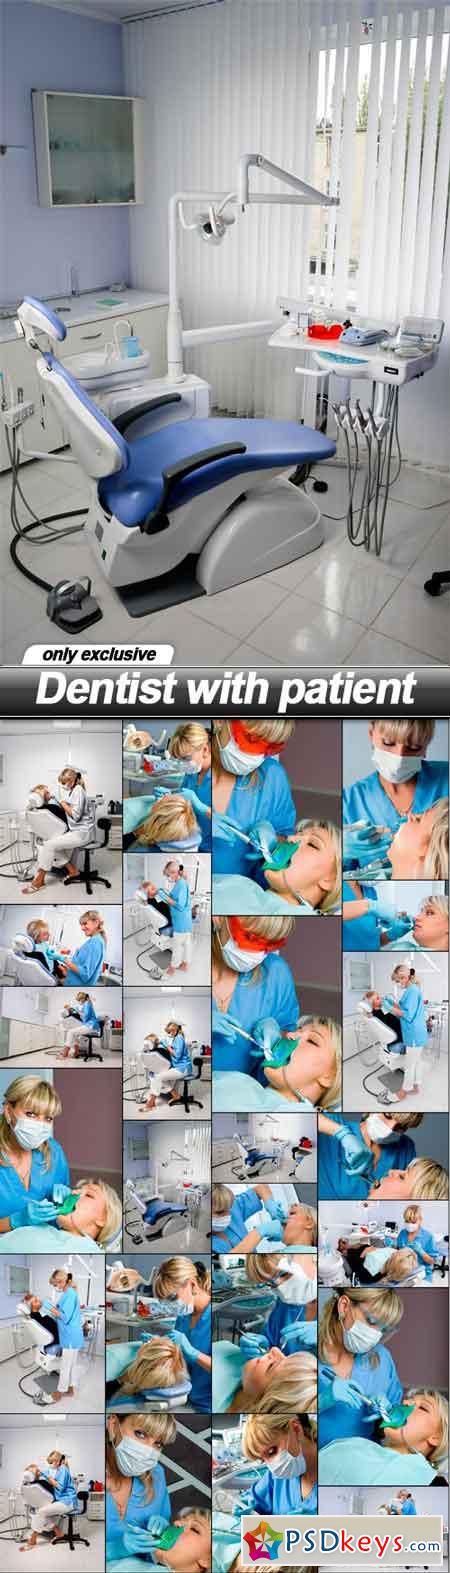 Dentist with patient - 25 UHQ JPEG